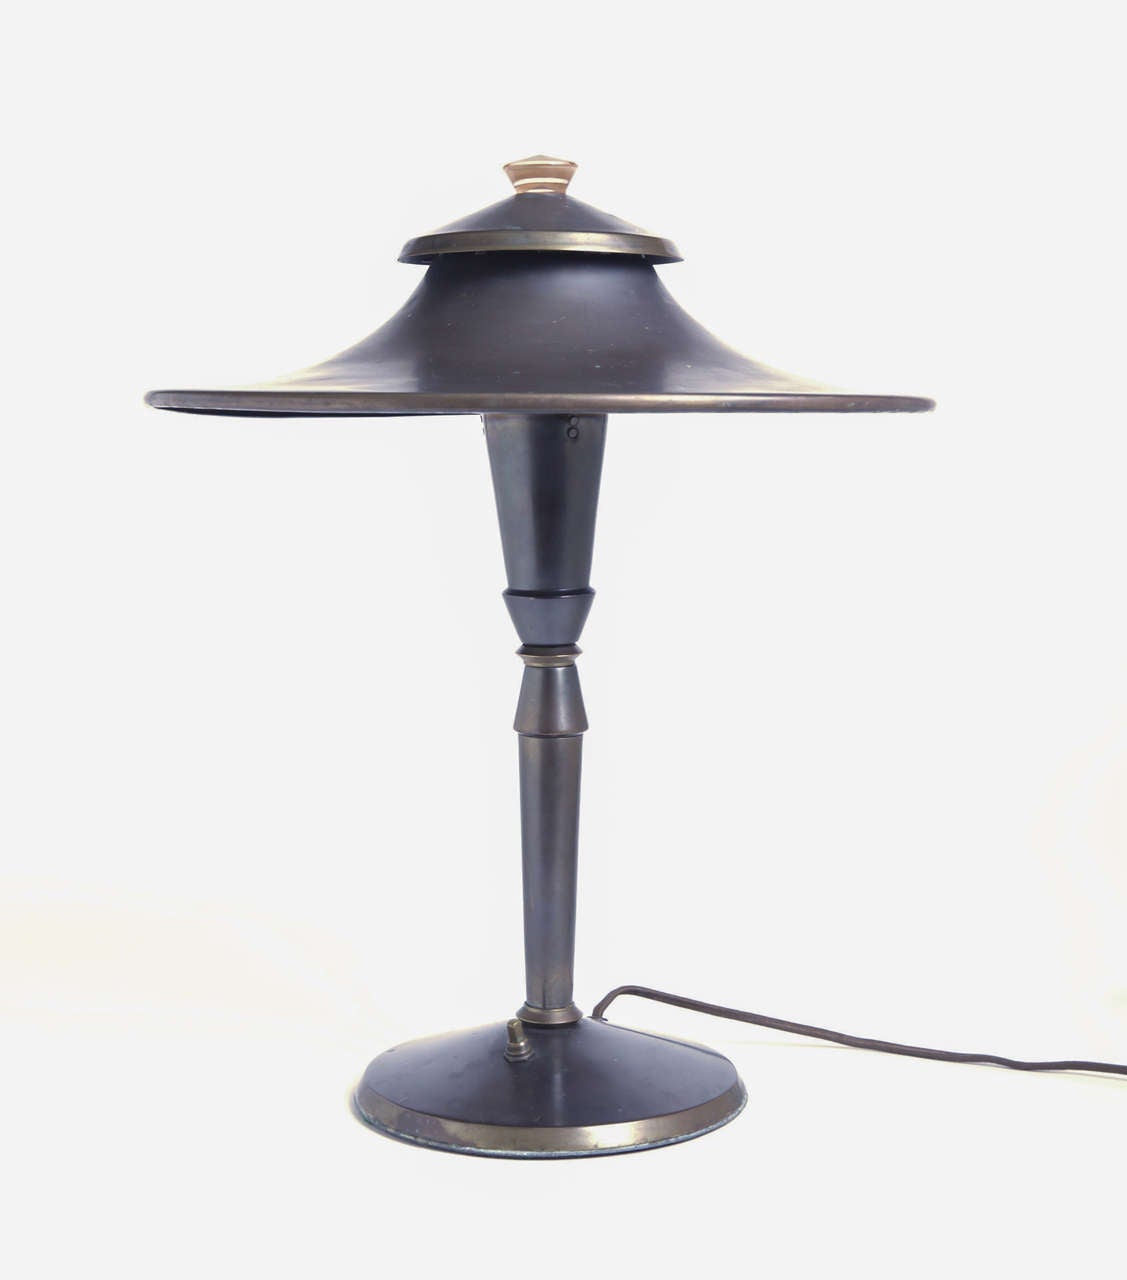 Here is the original large-shade PATENTED version of this now iconic (yet still misattributed) table lamp designed by Leroy Doane in 1928.
Original bronzed-brass finish with peach hued cased-glass finial.

This lamp is designed by neither Von